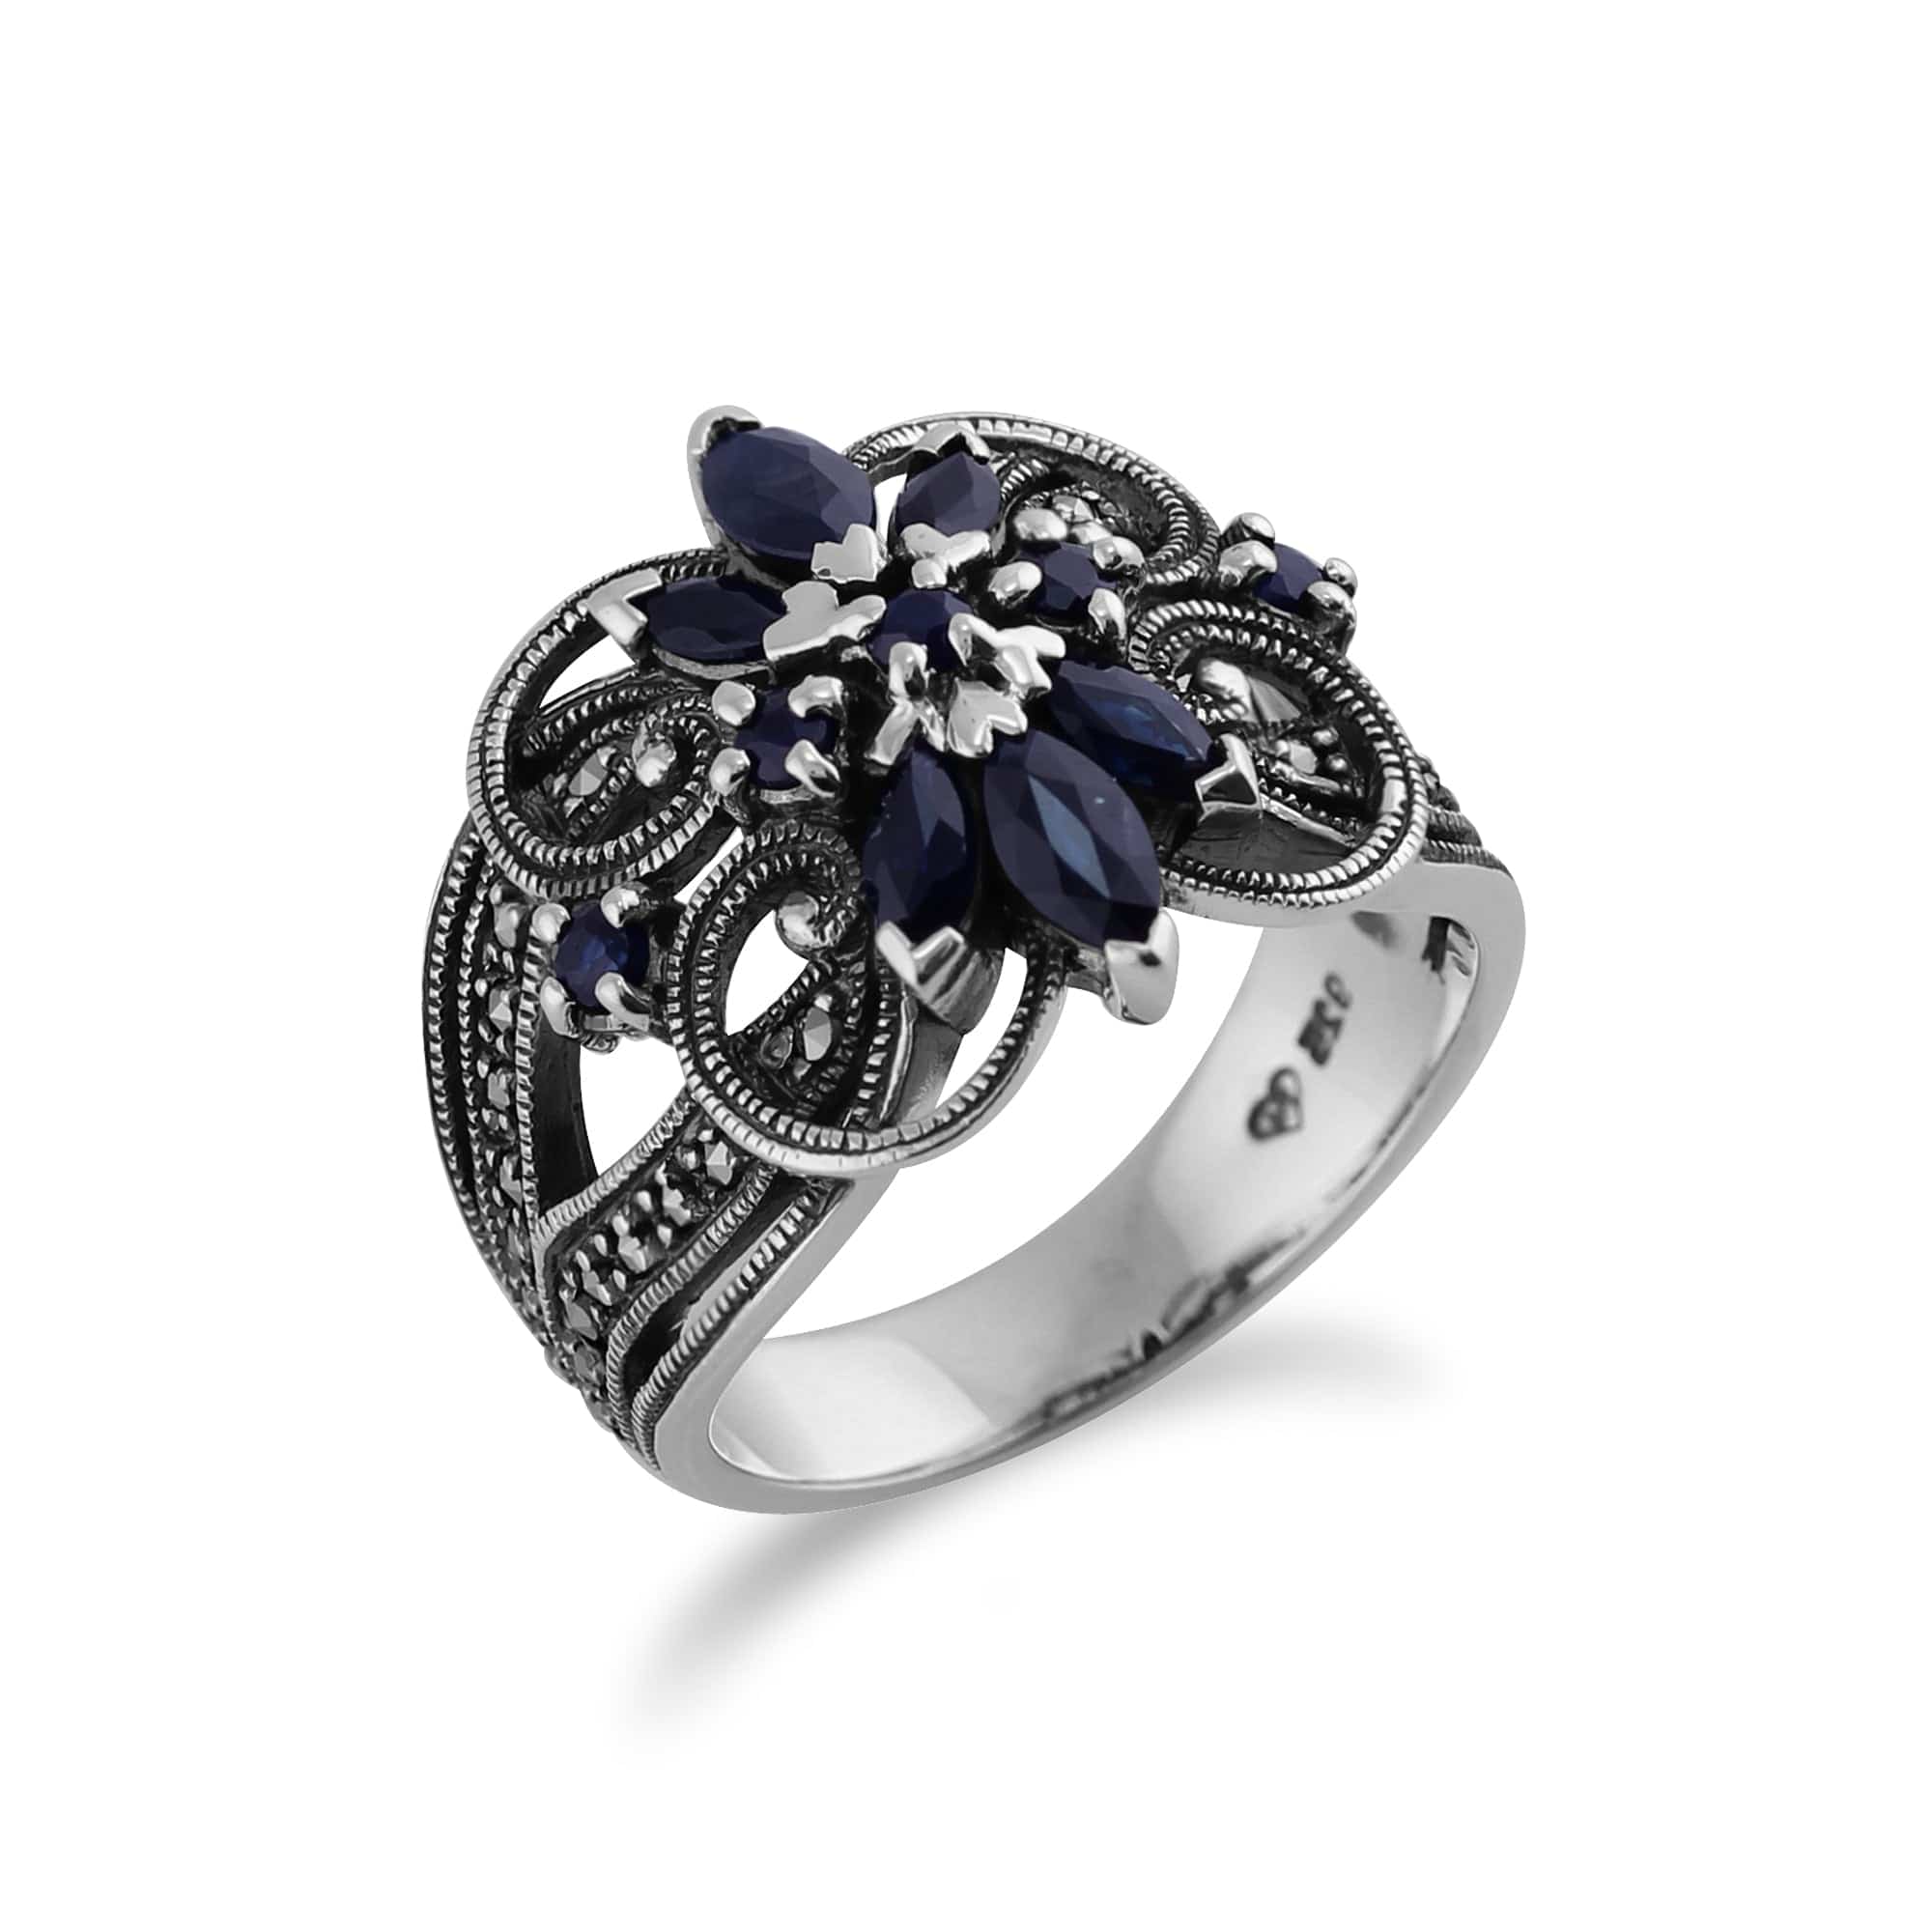 214R254009925 Art Nouveau Style Marquise Sapphire & Marcasite Floral Cocktail Ring in 925 Sterling Silver 2